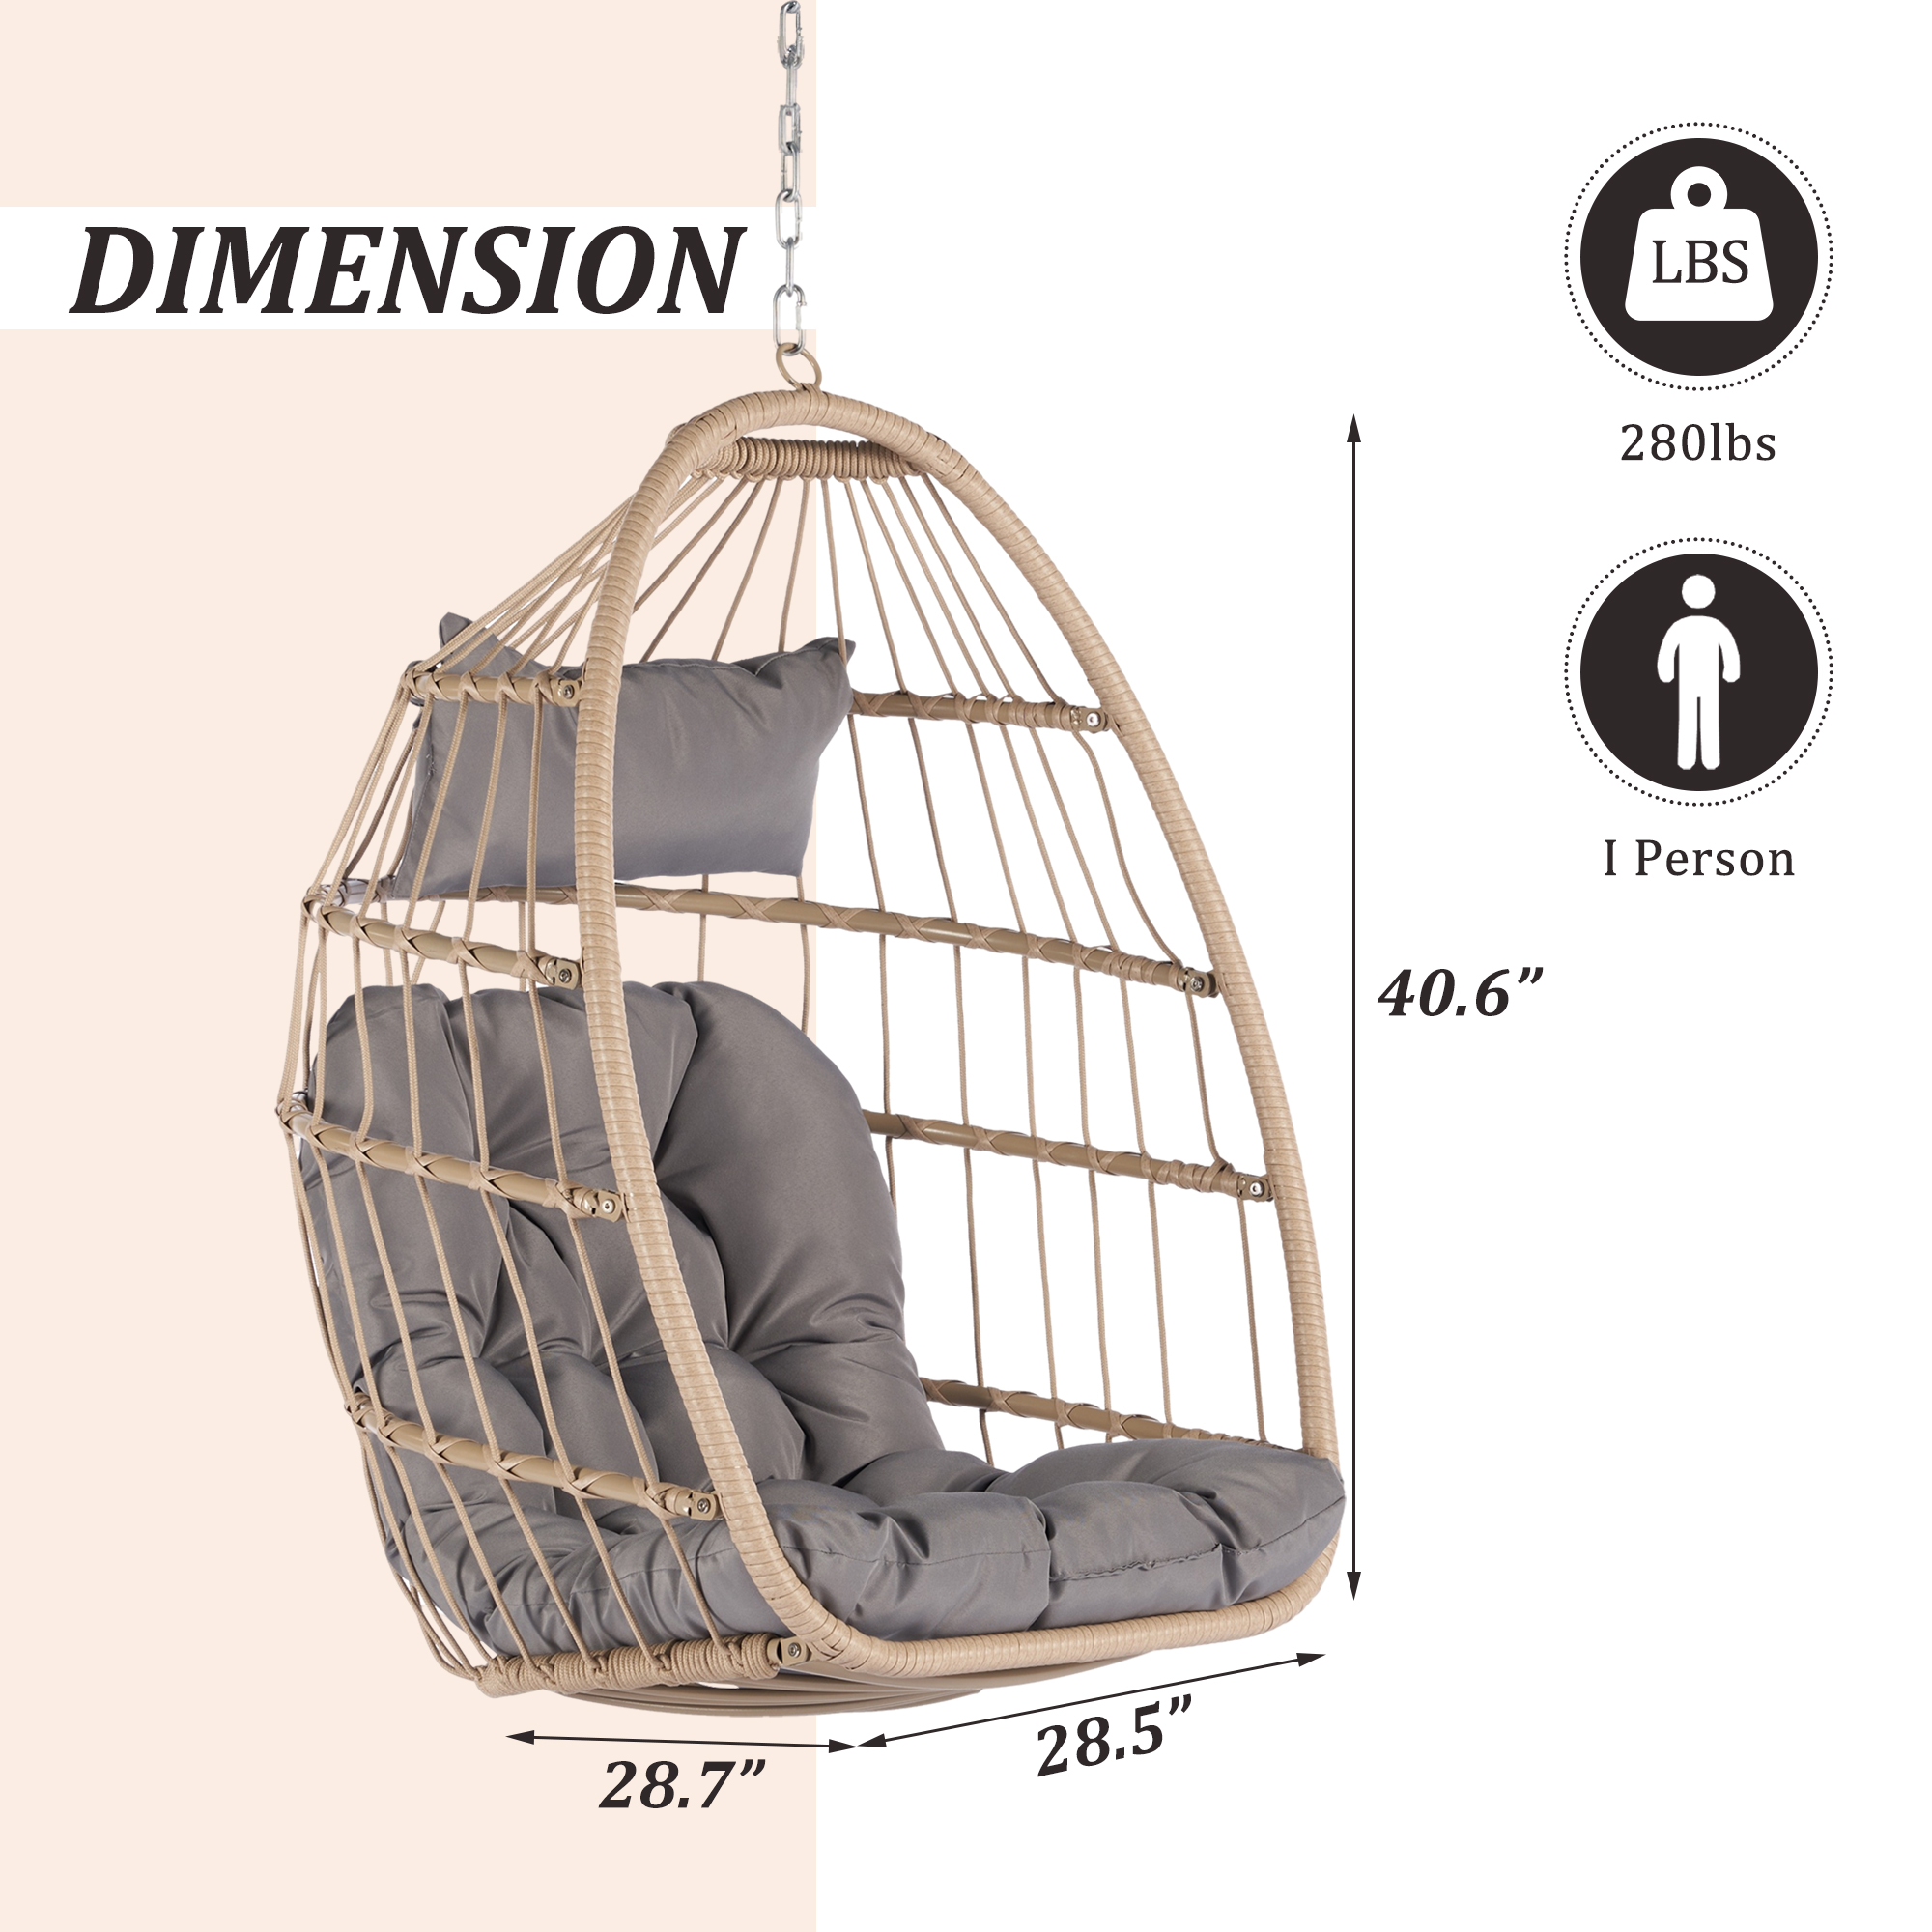 Patio Wicker Hanging Chair, Egg Chair Hammock Chair with UV Resistant Cushion and Pillow for Indoor Outdoor, Patio Backyard Balcony Lounge Rattan Swing Chair - image 2 of 6